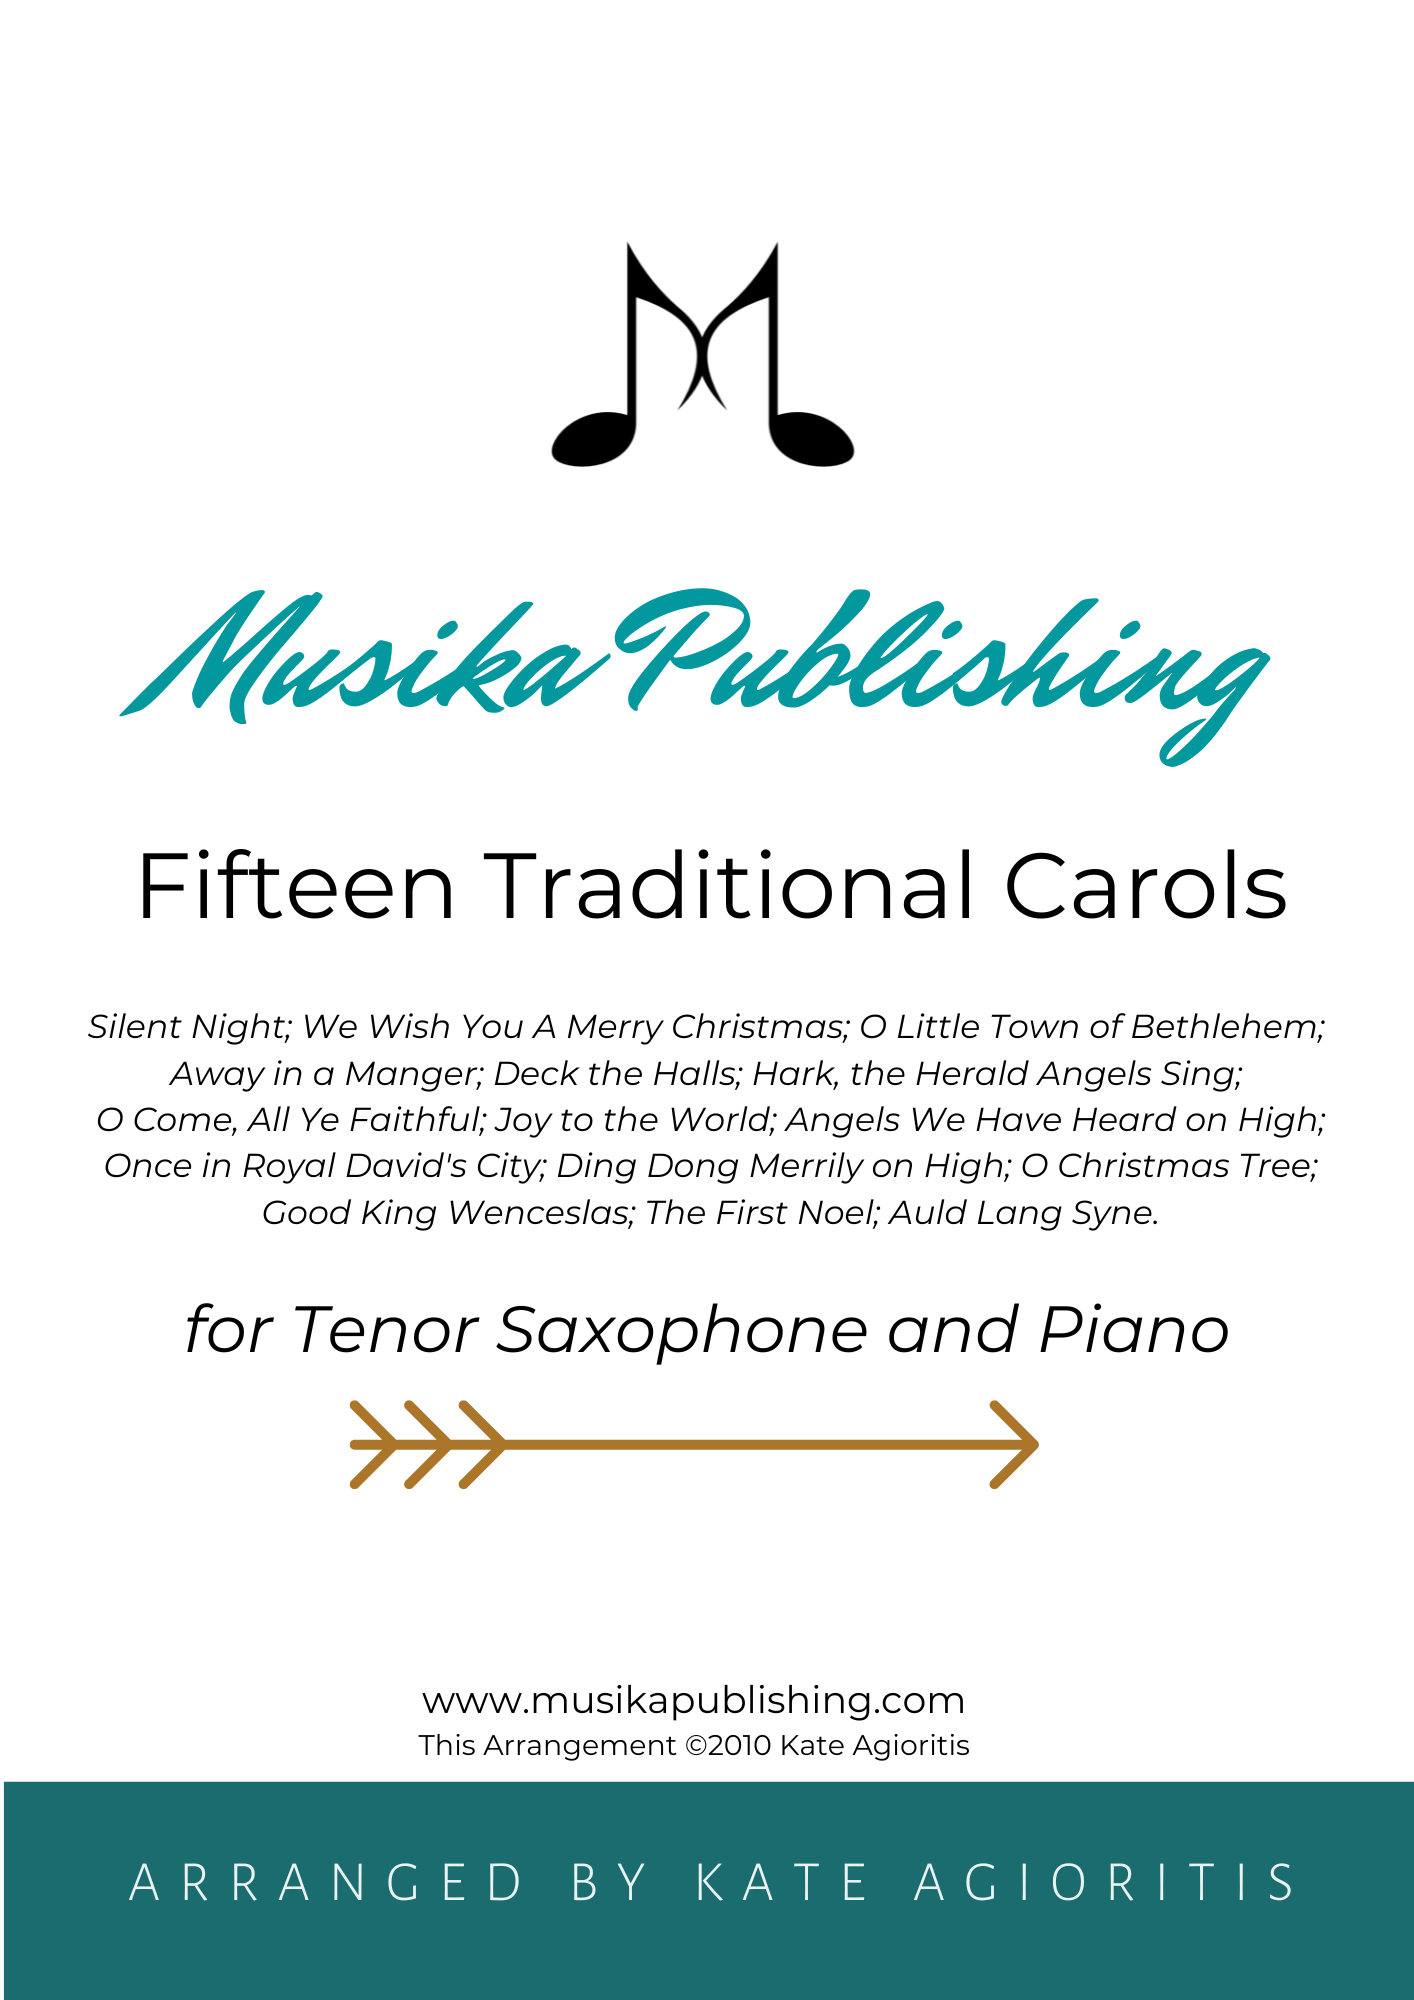 Fifteen Traditional Carols – for Tenor Saxophone and Piano